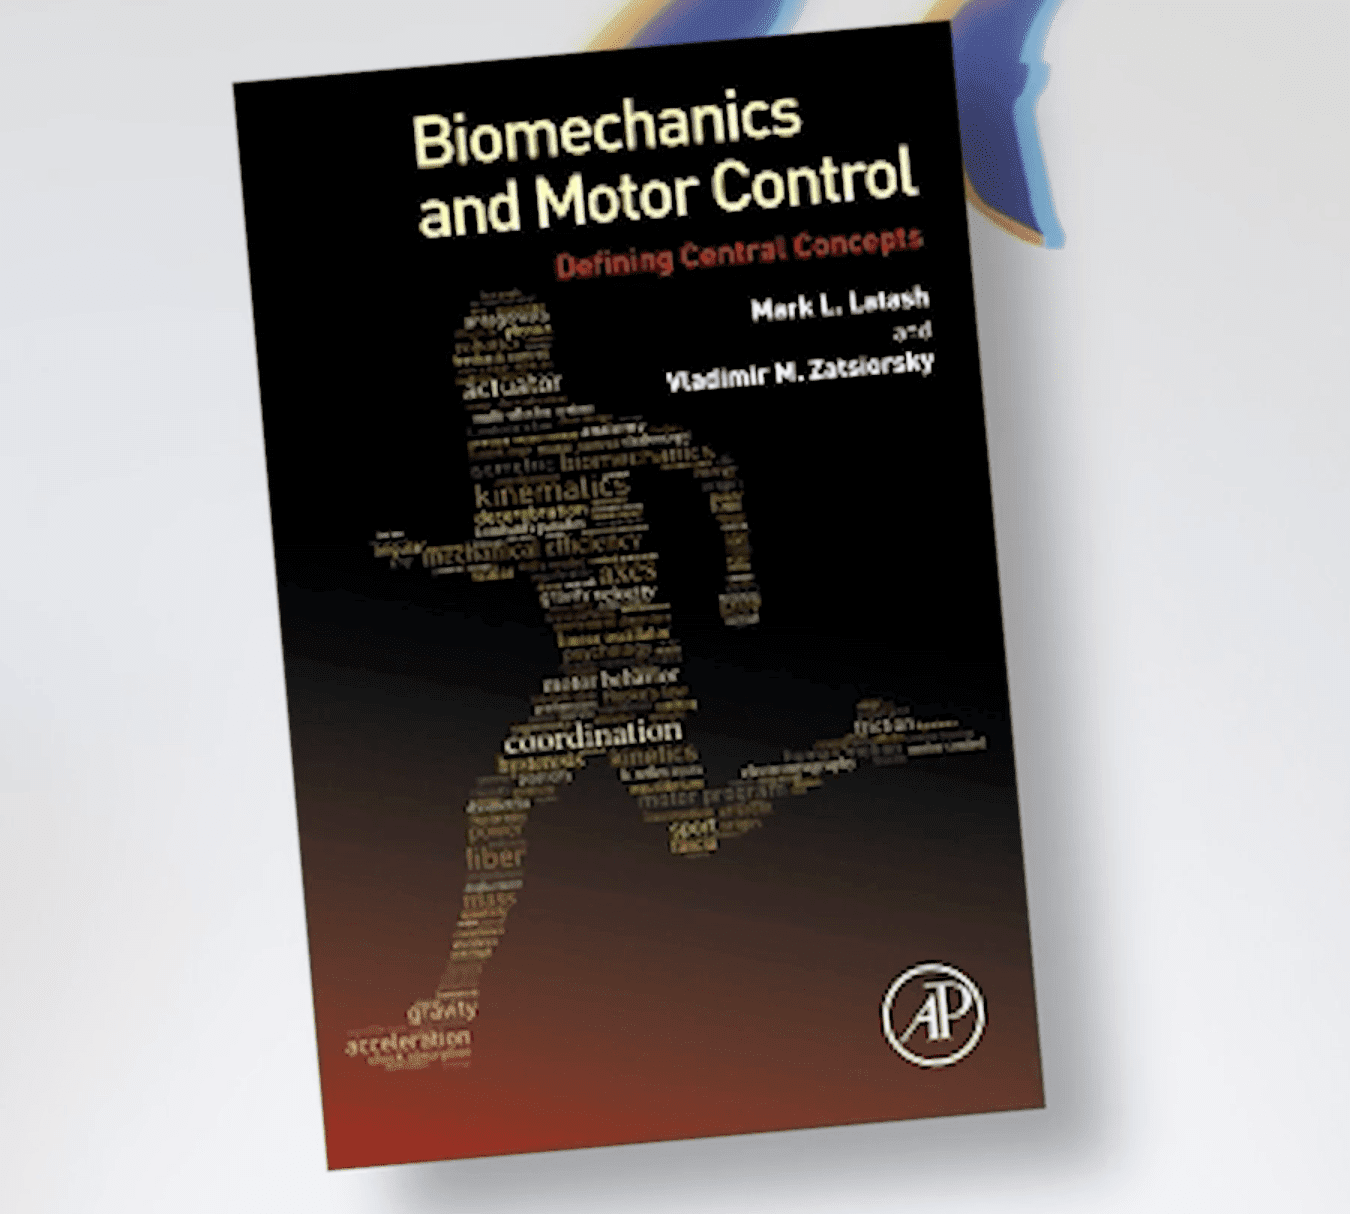 Biomechanics and Motor Control - Best Physical Therapy Liturature